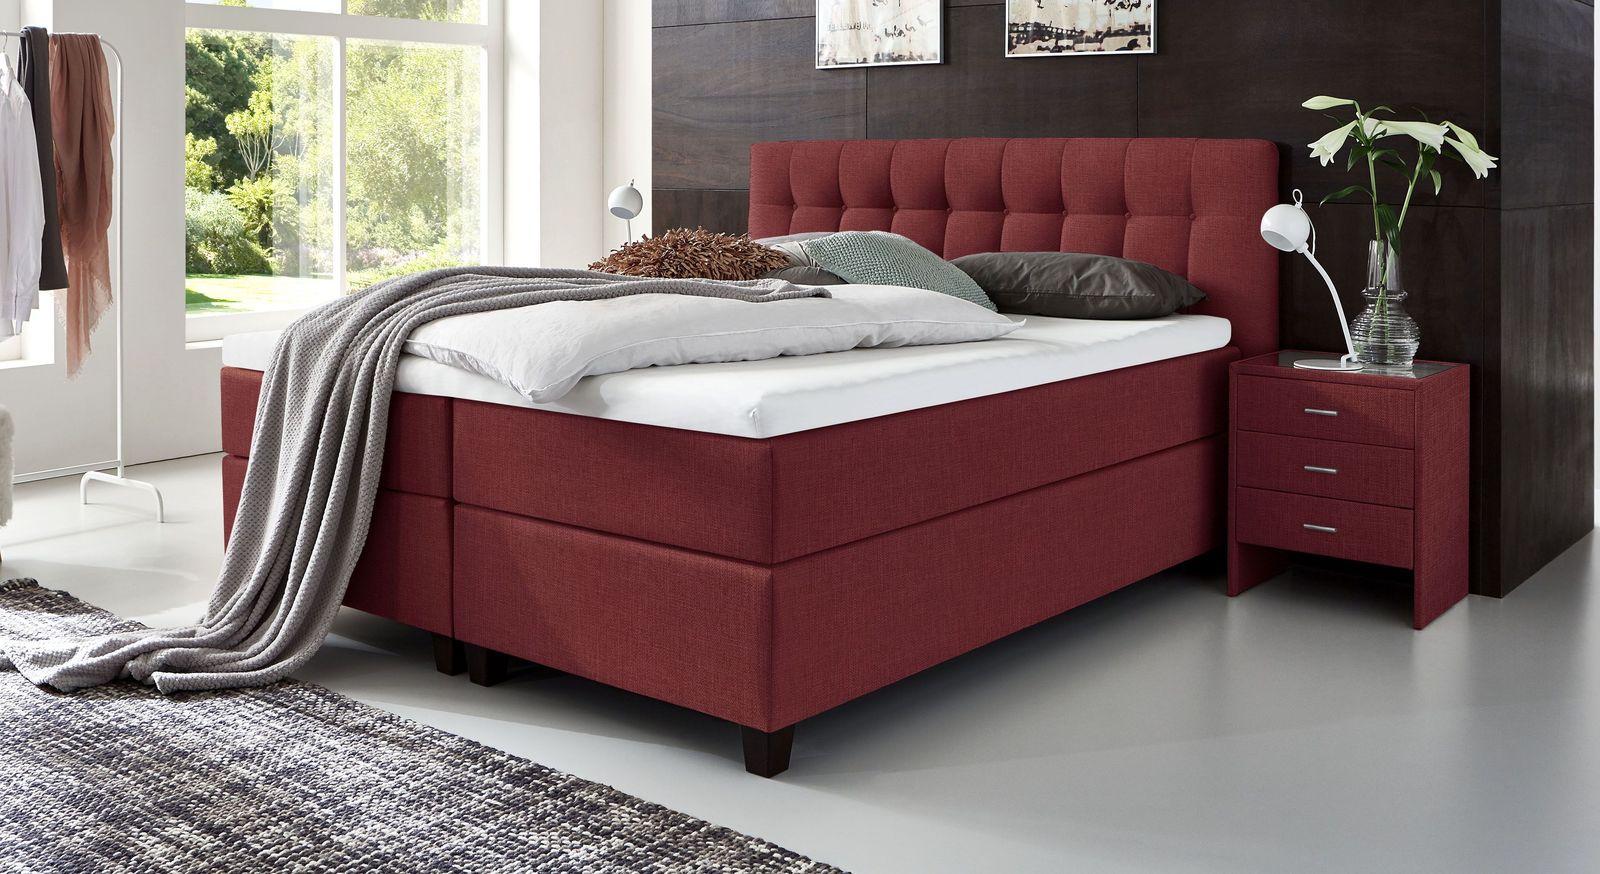 66 cm hohes Boxspringbett Luciano aus meliertem Webstoff in Rot